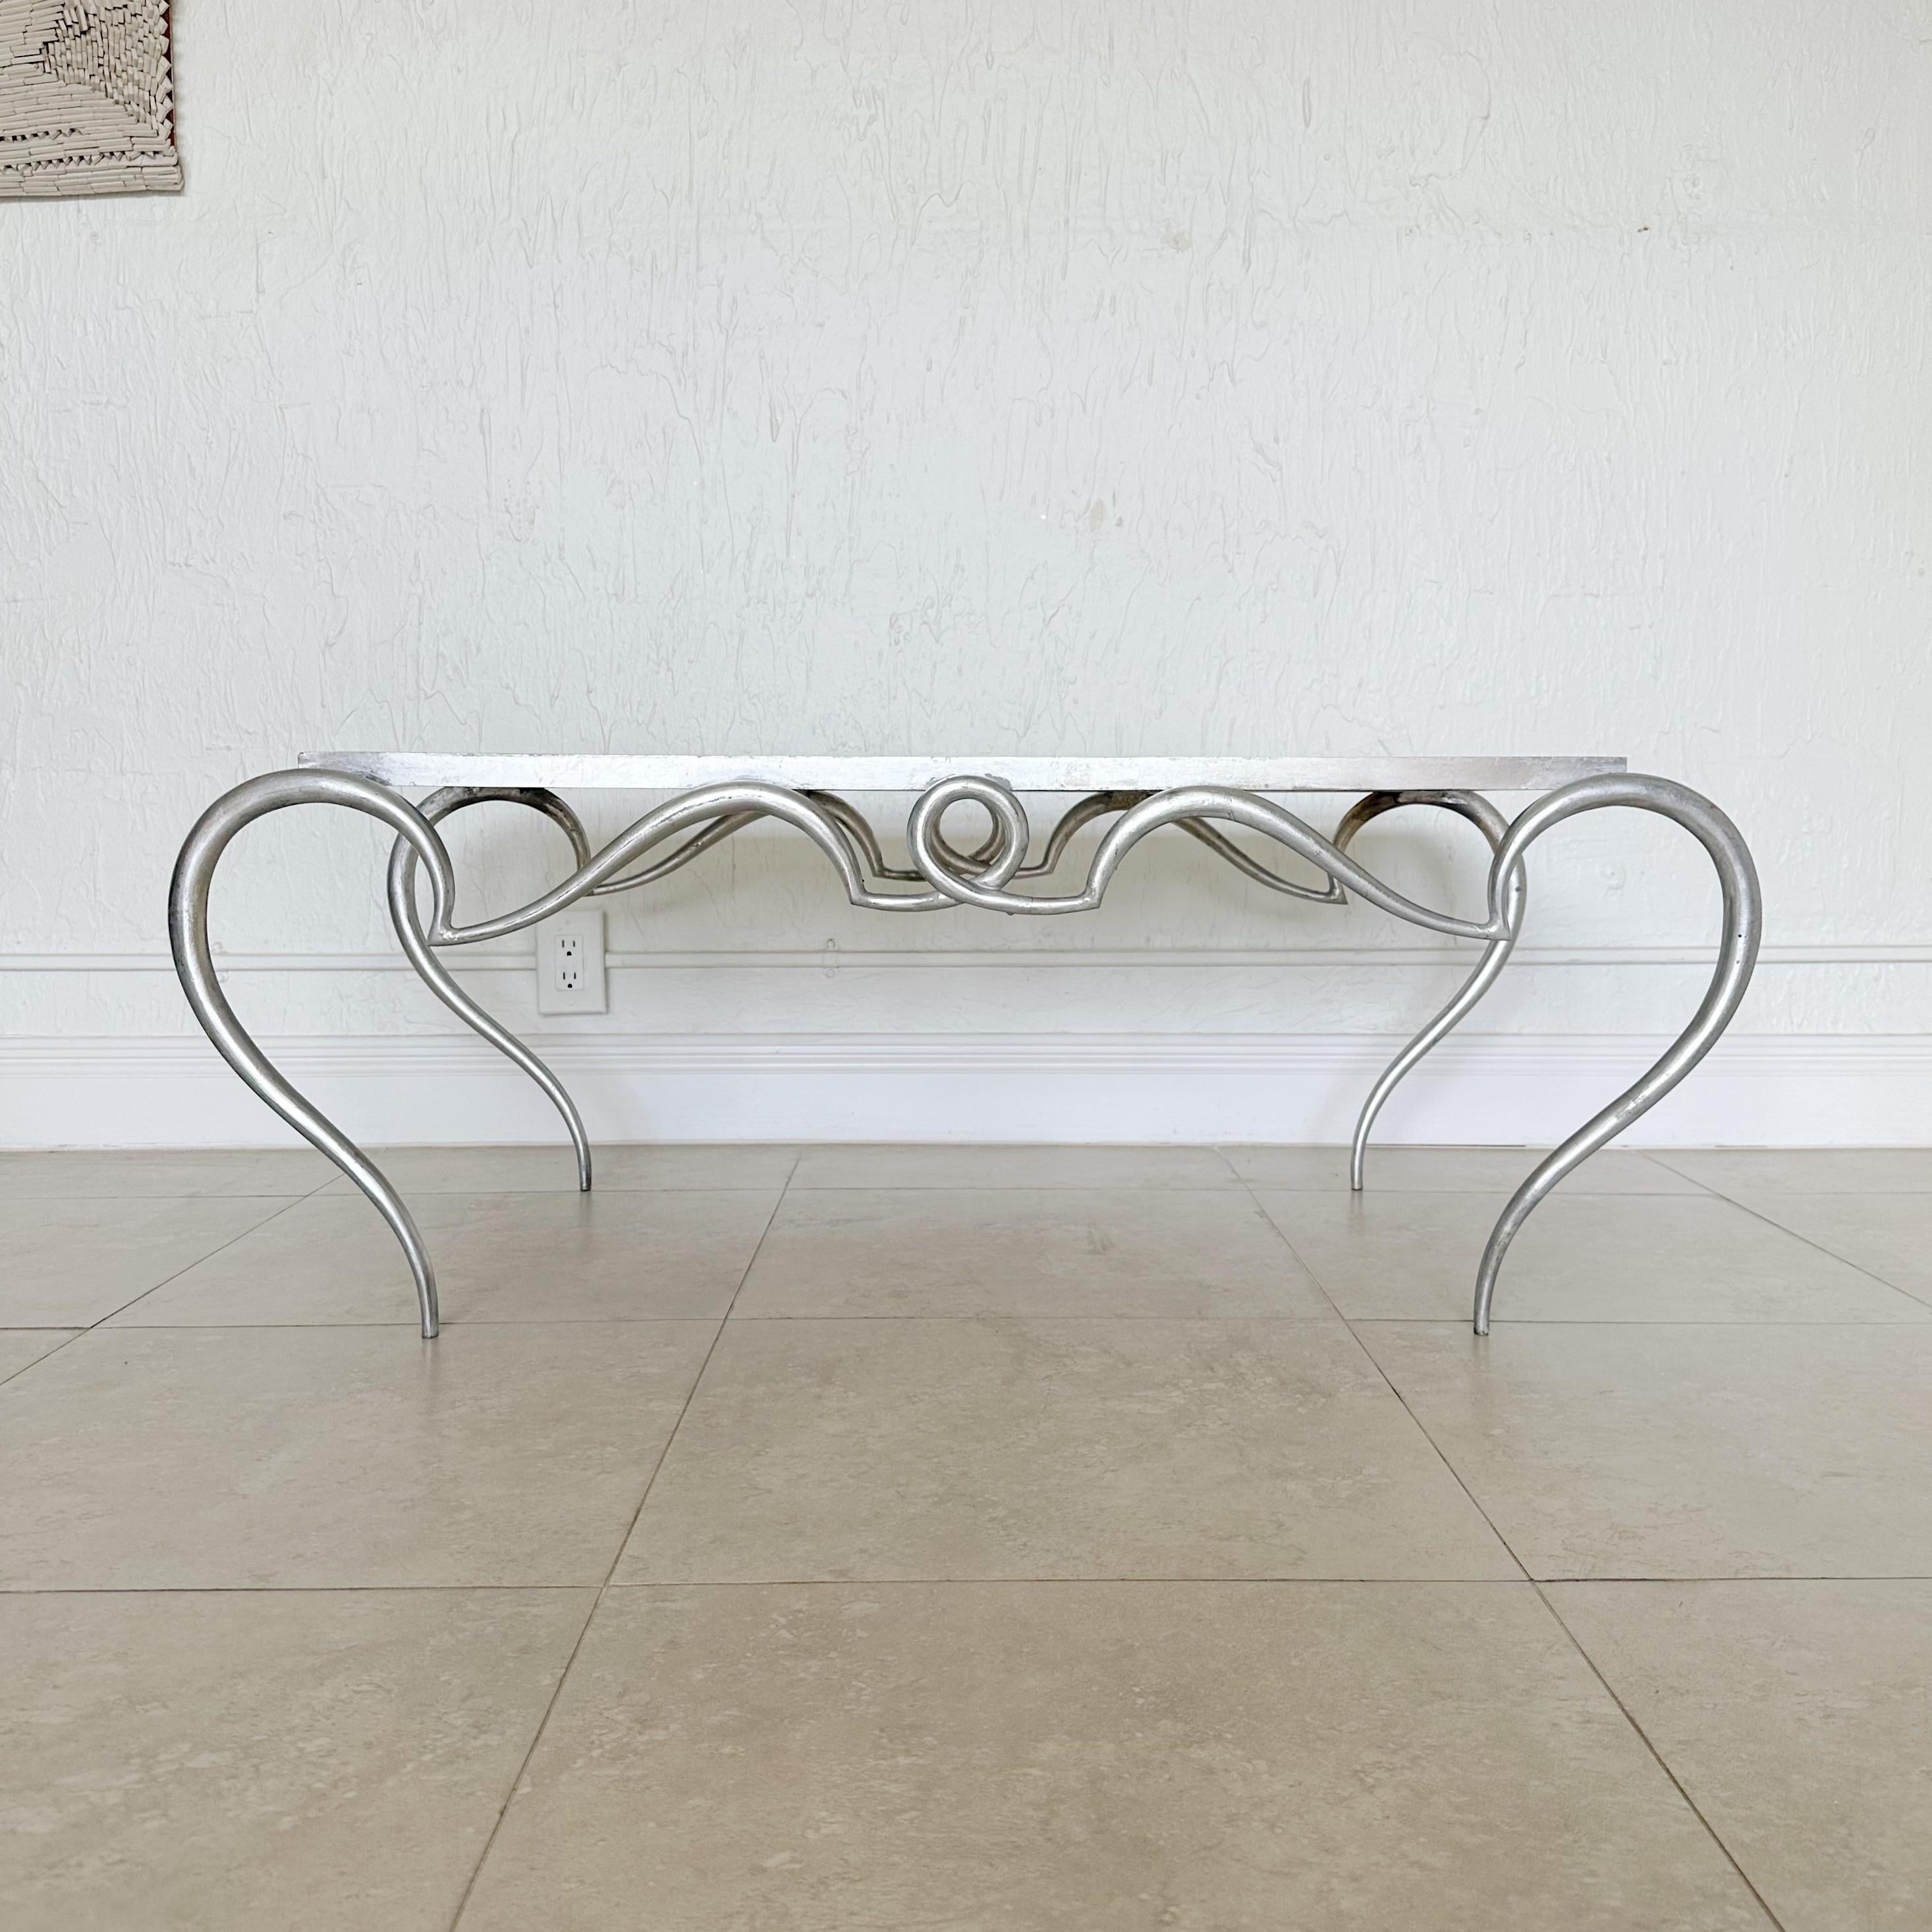 This coffee table is an interesting piece and
could be a good addition to any
home or collection. It has a unique
design, very ornate and intricate
scrollwork, as well as a replaced
beveled stone top. It features a
sophisticated silver leaf